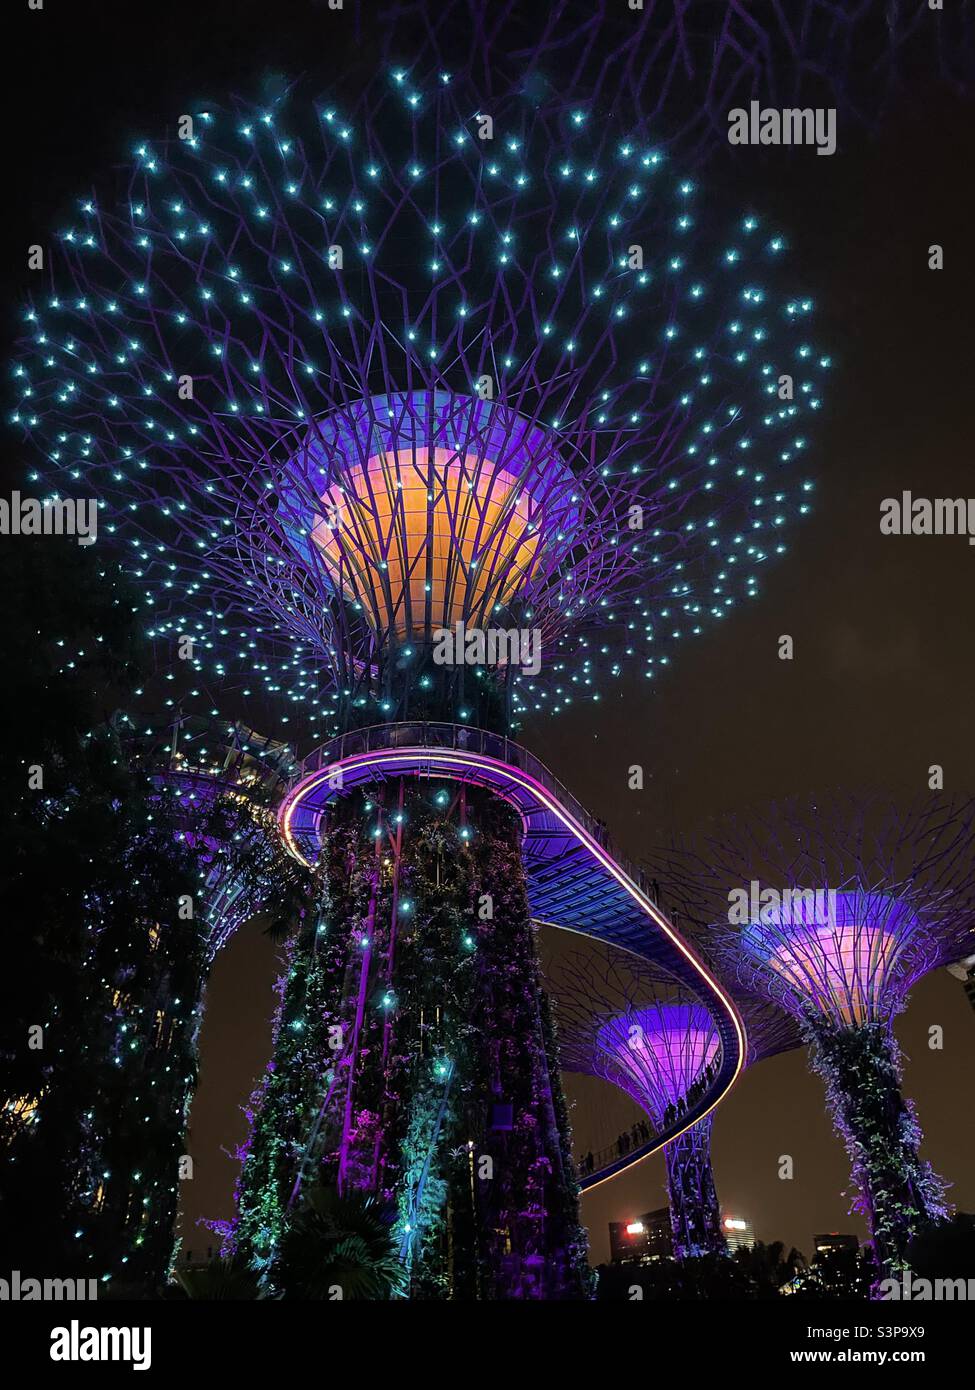 Super groove tree cluster at Singapore garden by the bay Stock Photo